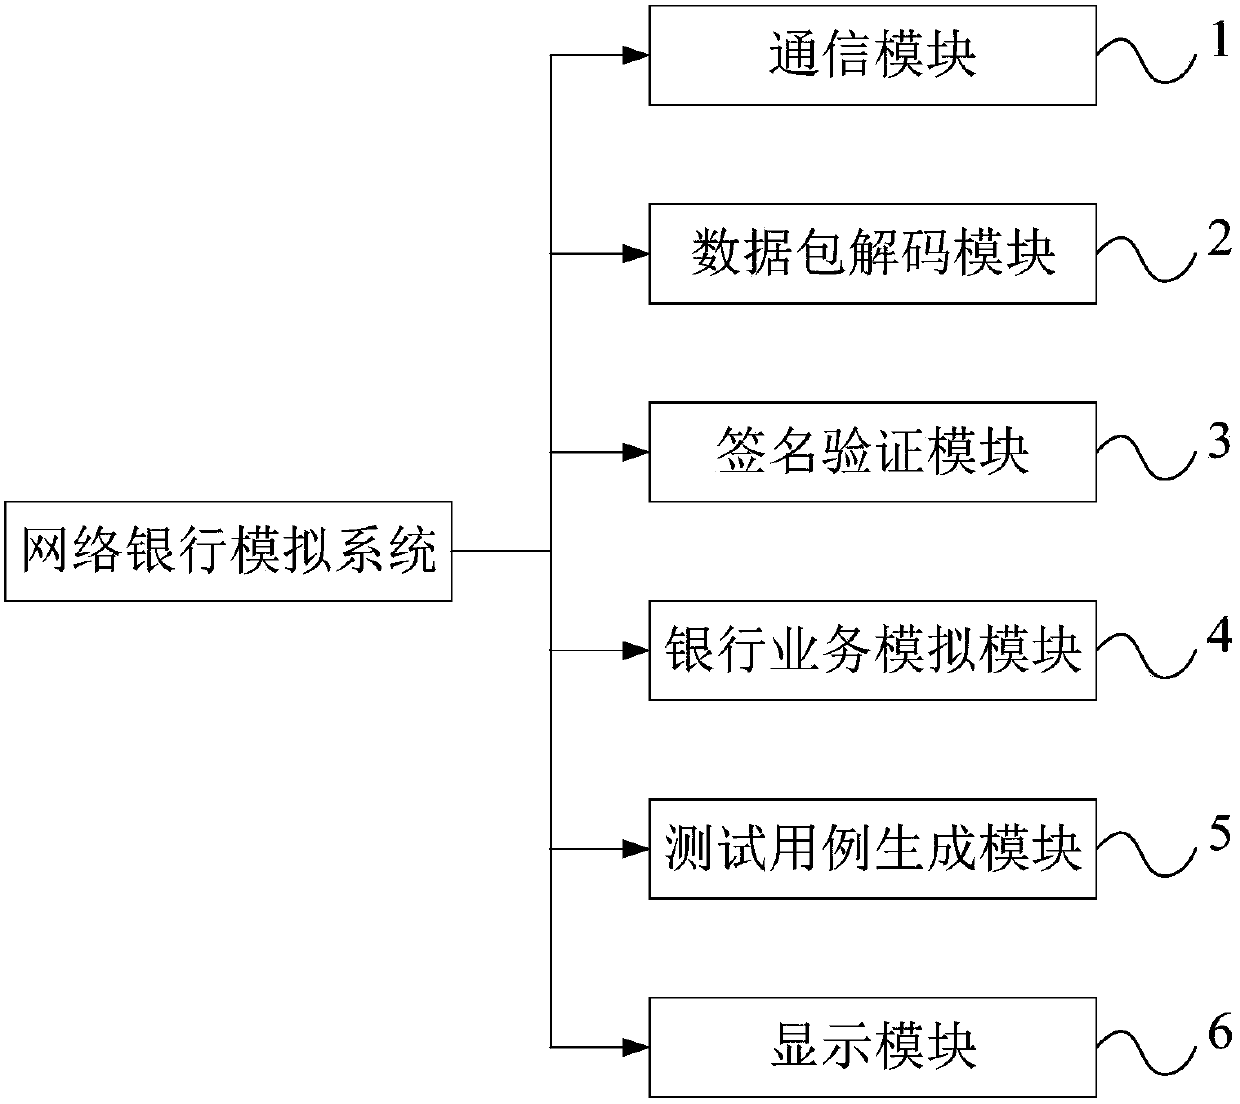 Network bank simulation system and method